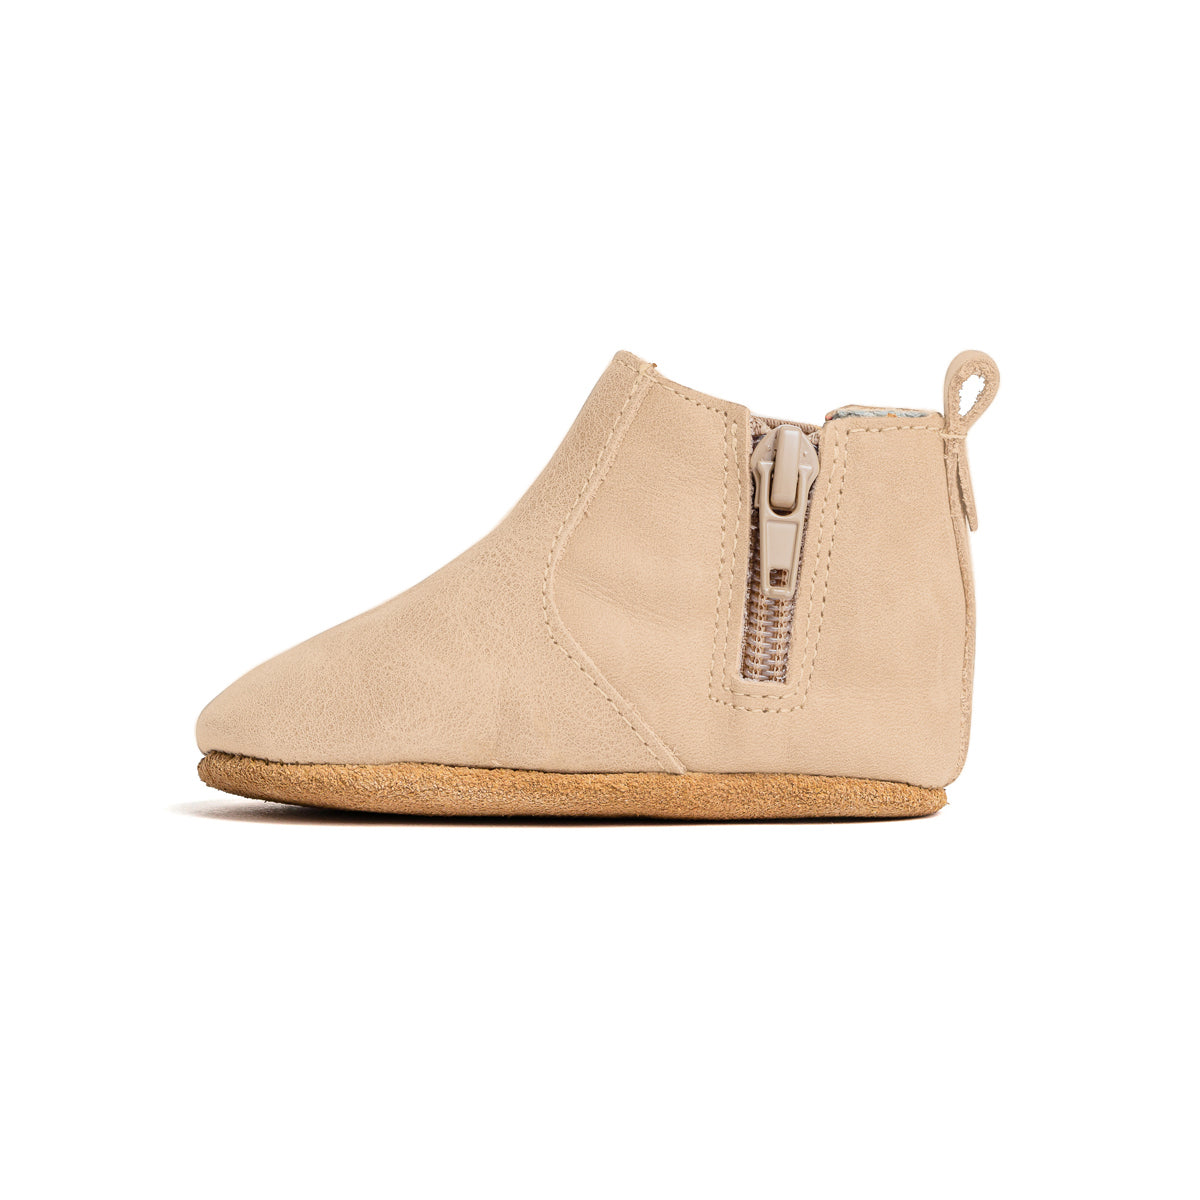 Side view of baby electric boot in colour sand with zip detail